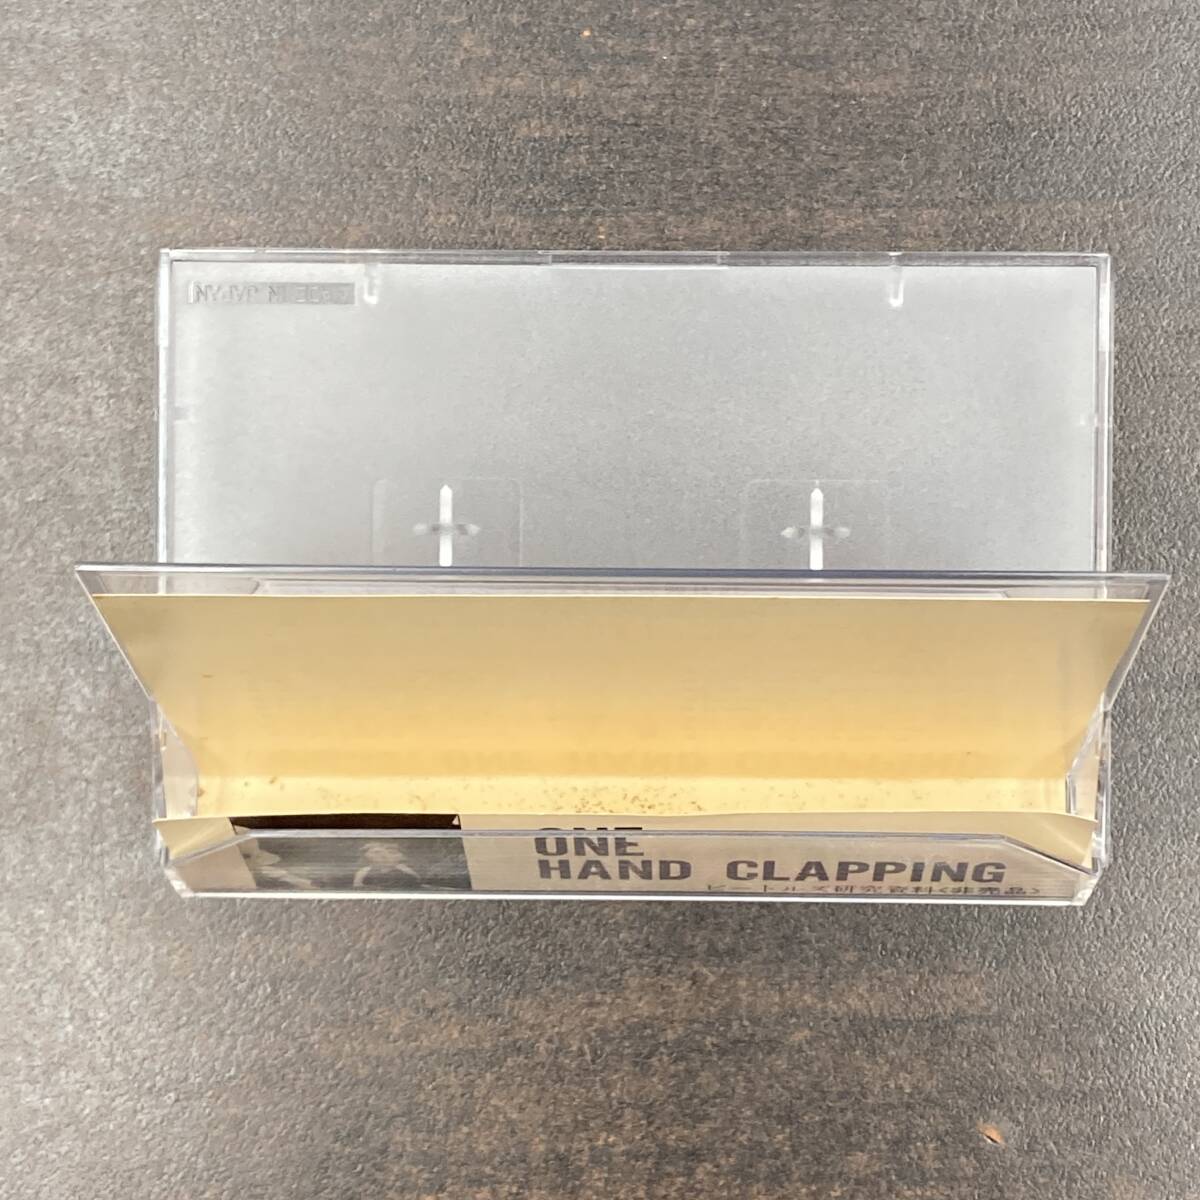 1219M ザ・ビートルズ 研究資料 ONE HAND CLAPPING カセットテープ / THE BEATLES Research materials Cassette Tapeの画像4